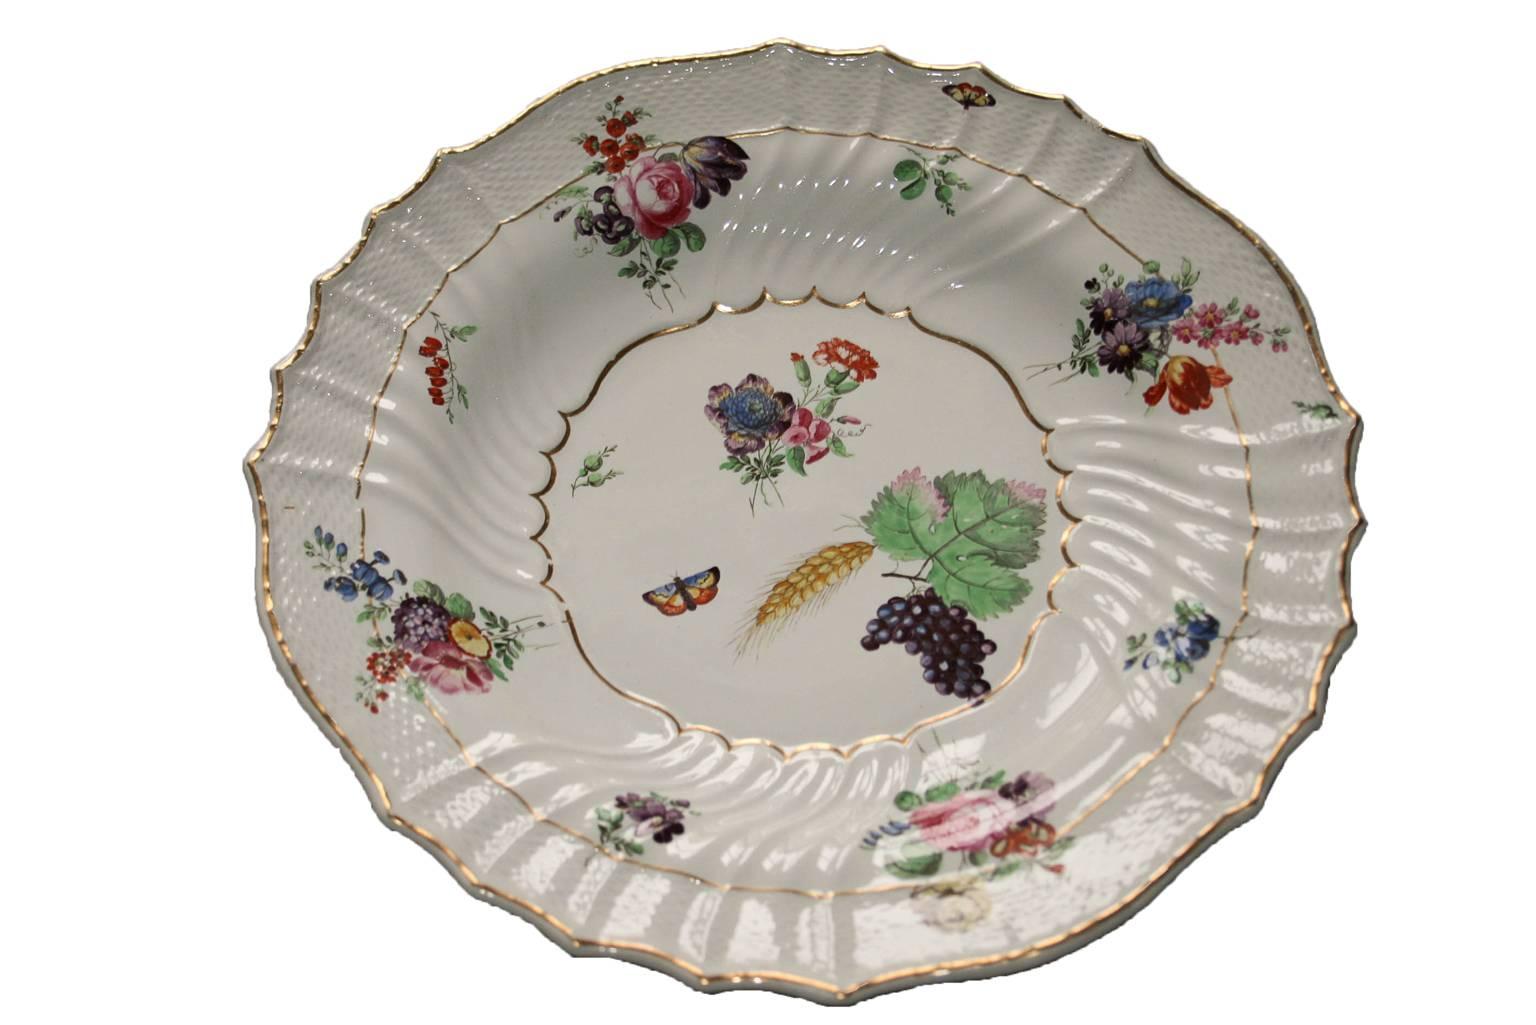 Italy Richard Ginori Mid-18th Century Porcelain Set 8 Dishes Floral Design For Sale 3